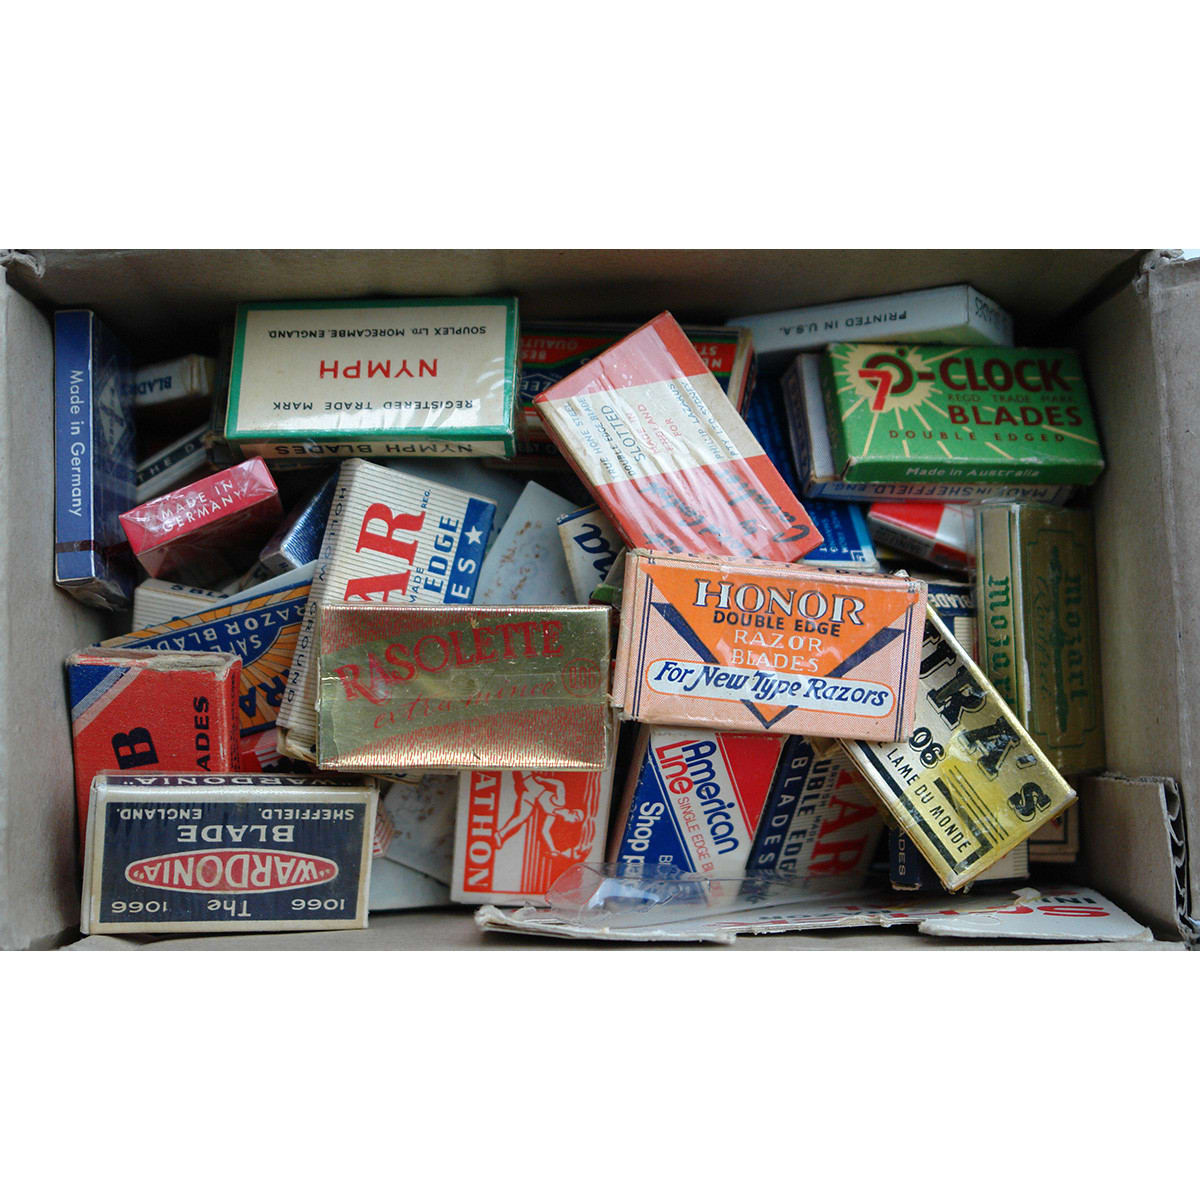 Large collection of Razor Blade Packets! Includes blades. Many different brands including loose blades in singles.